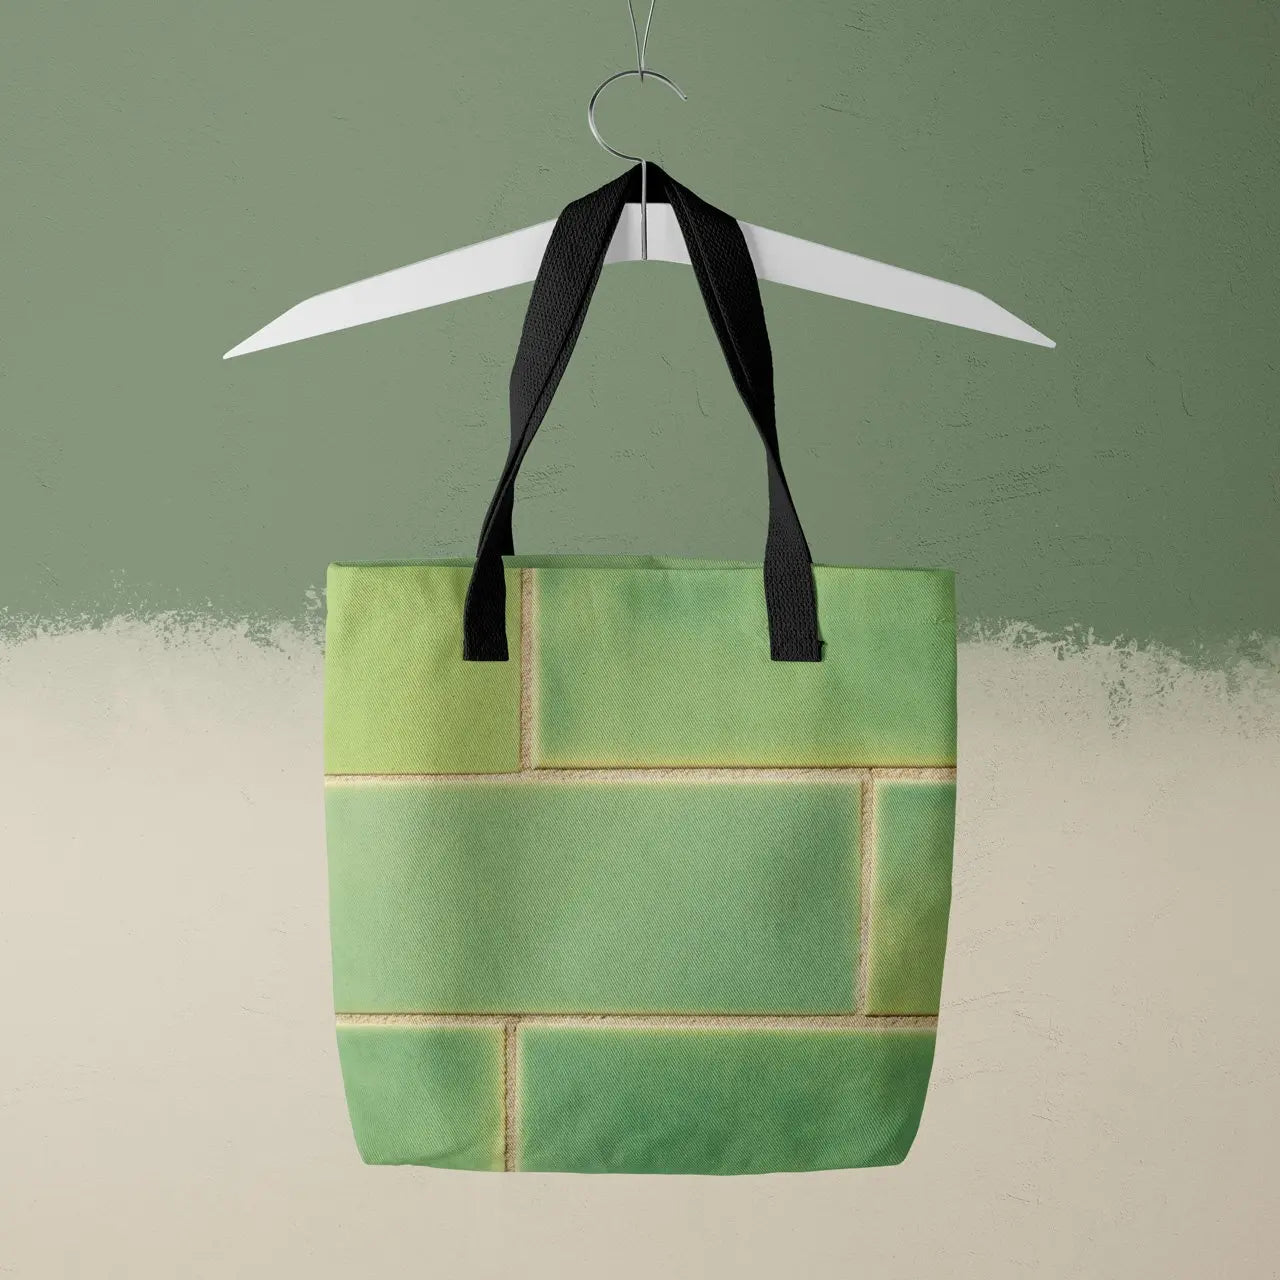 Emerald City - Heavy Duty Reusable Grocery Bag - Shopping Totes - Aesthetic Art